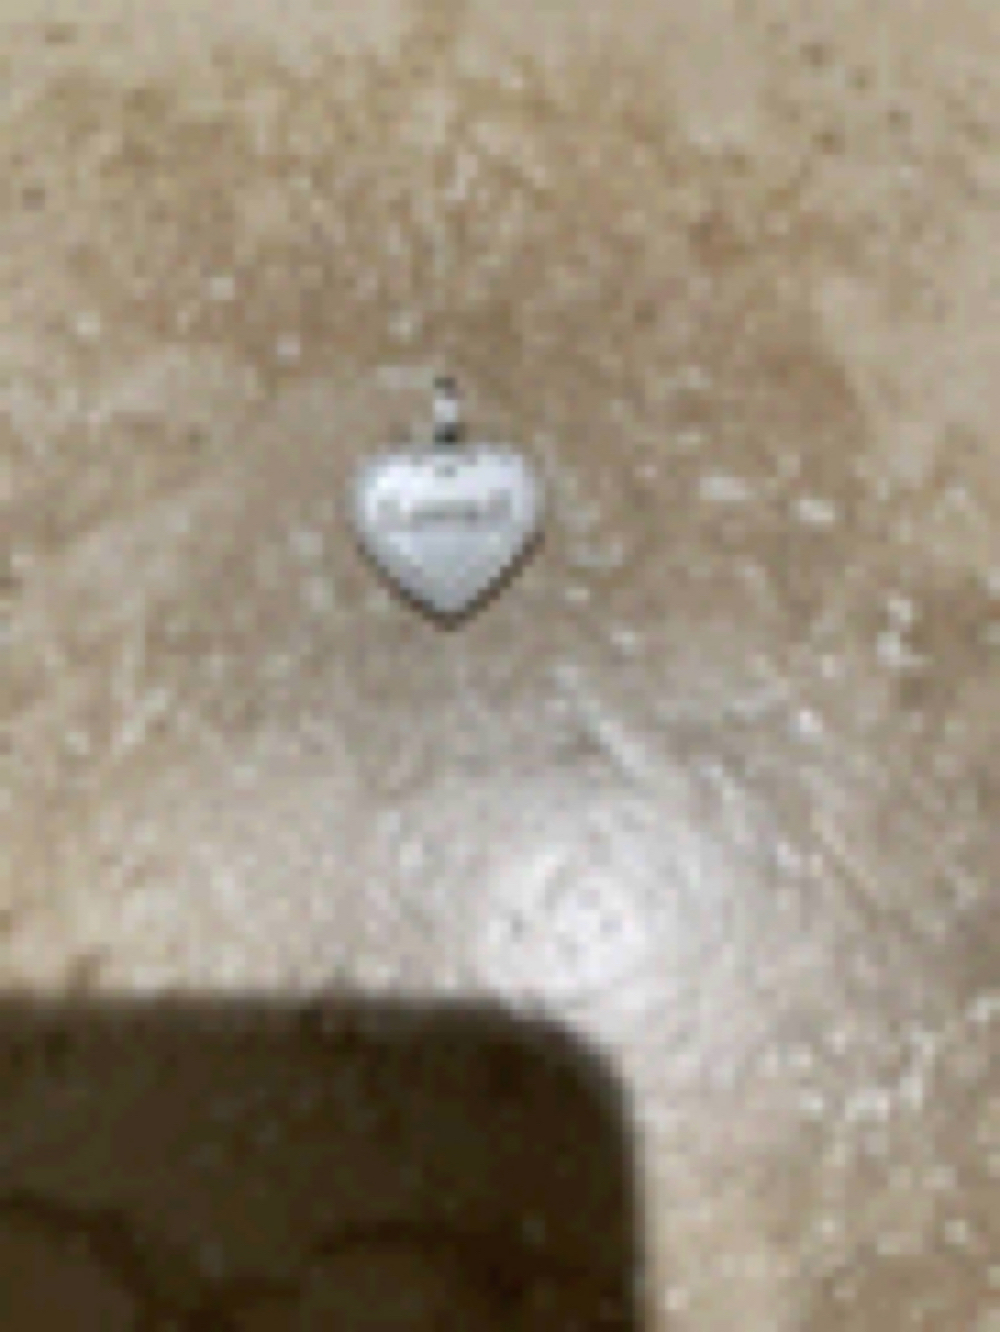 Primary image for “Loved” pendant jewelry